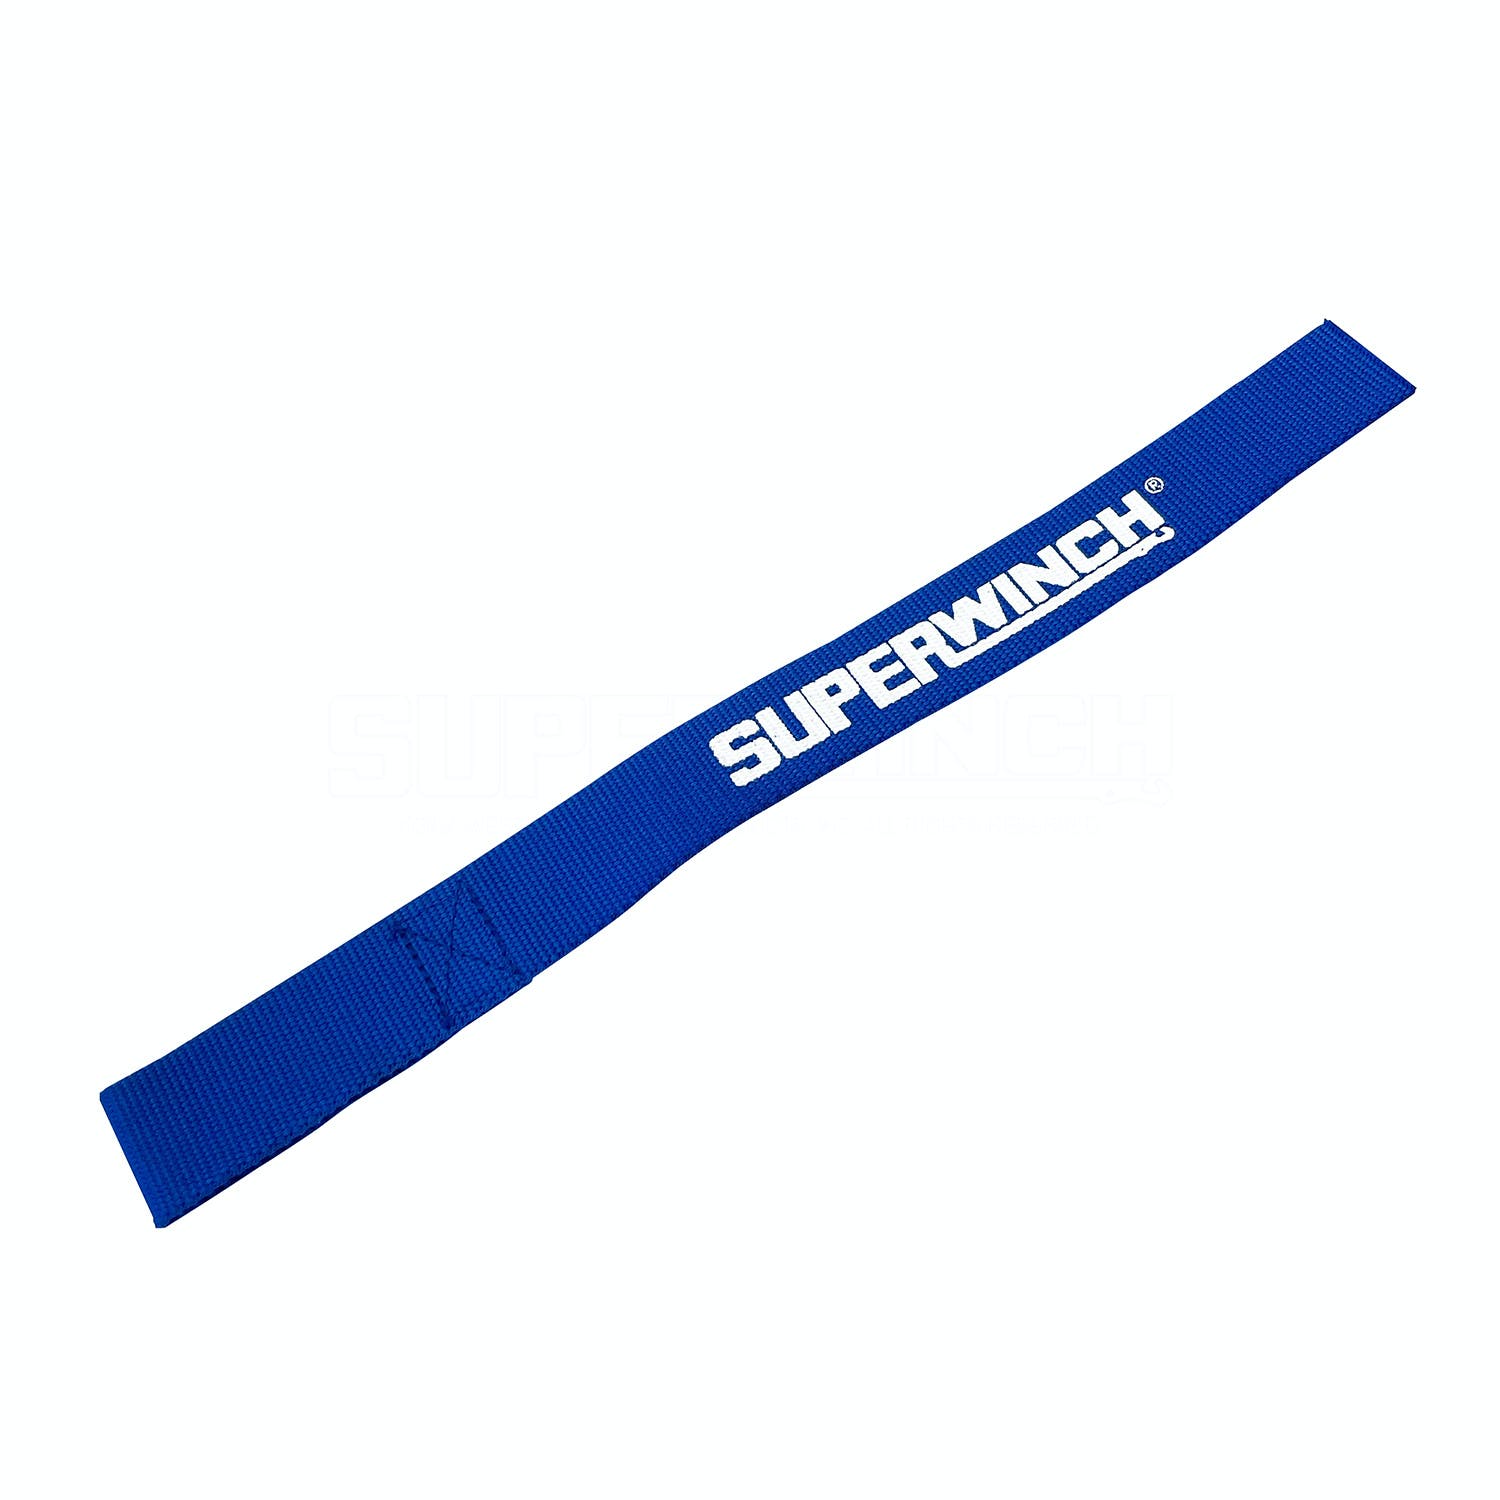 Superwinch S103138-01 Clevis Flag